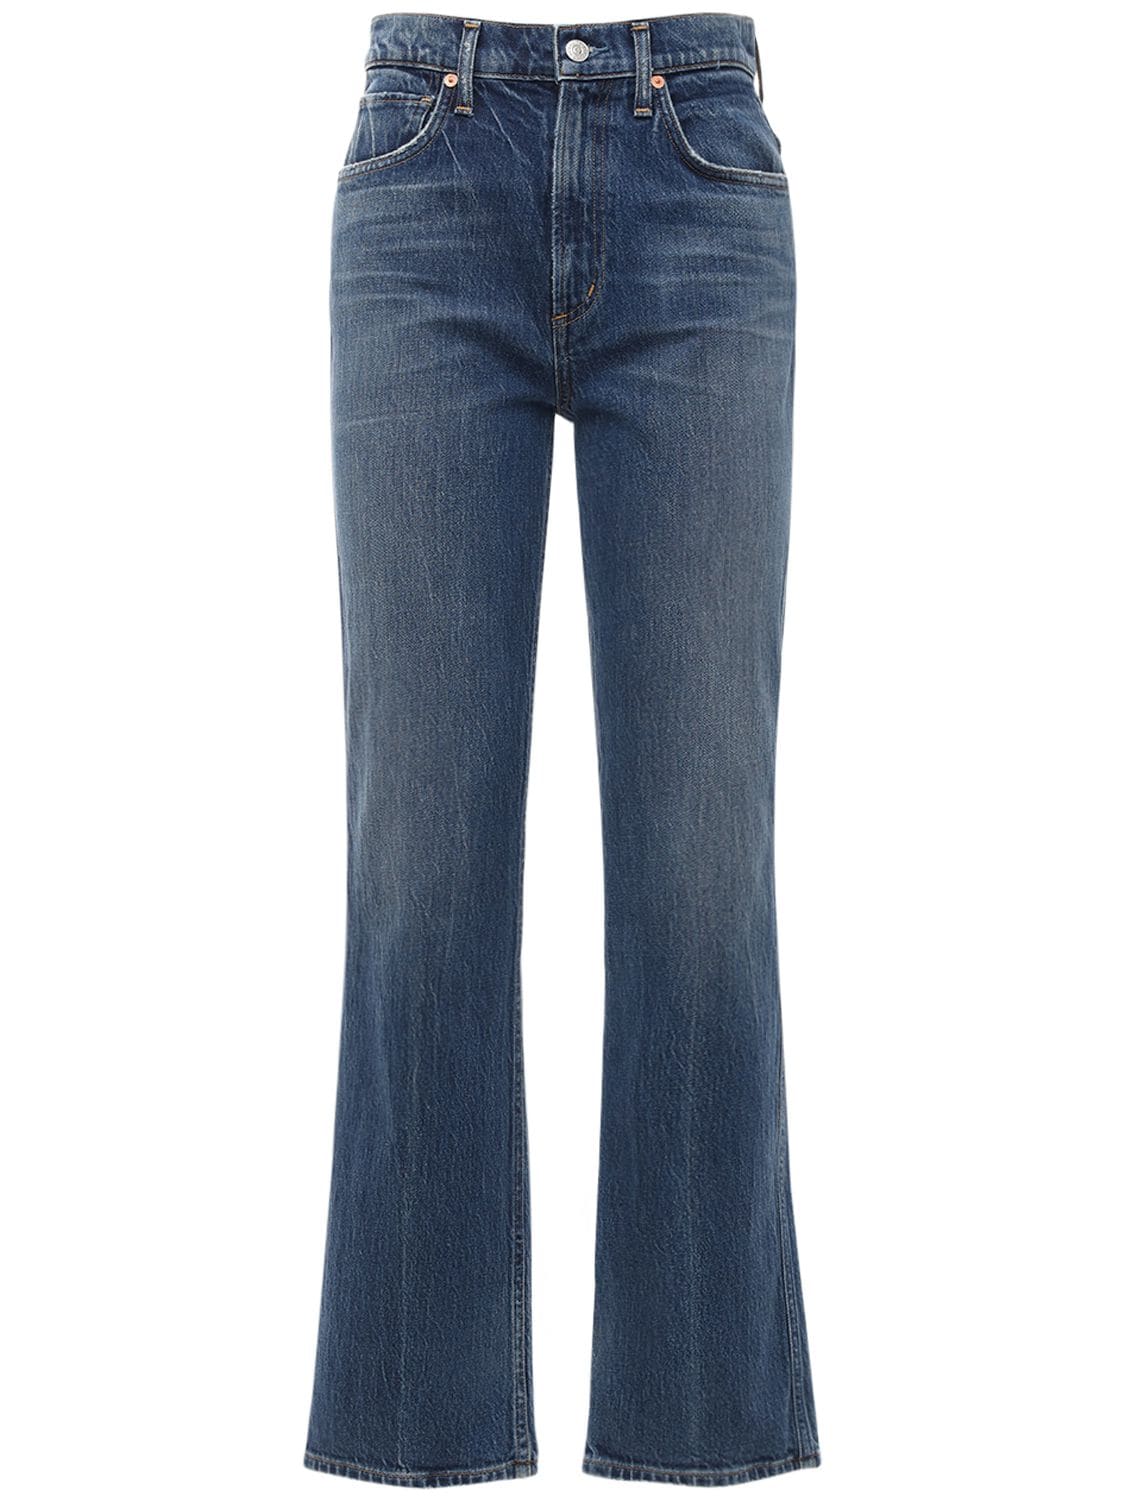 Daphne High Waist Stovepipe Jeans - CITIZENS OF HUMANITY - Modalova